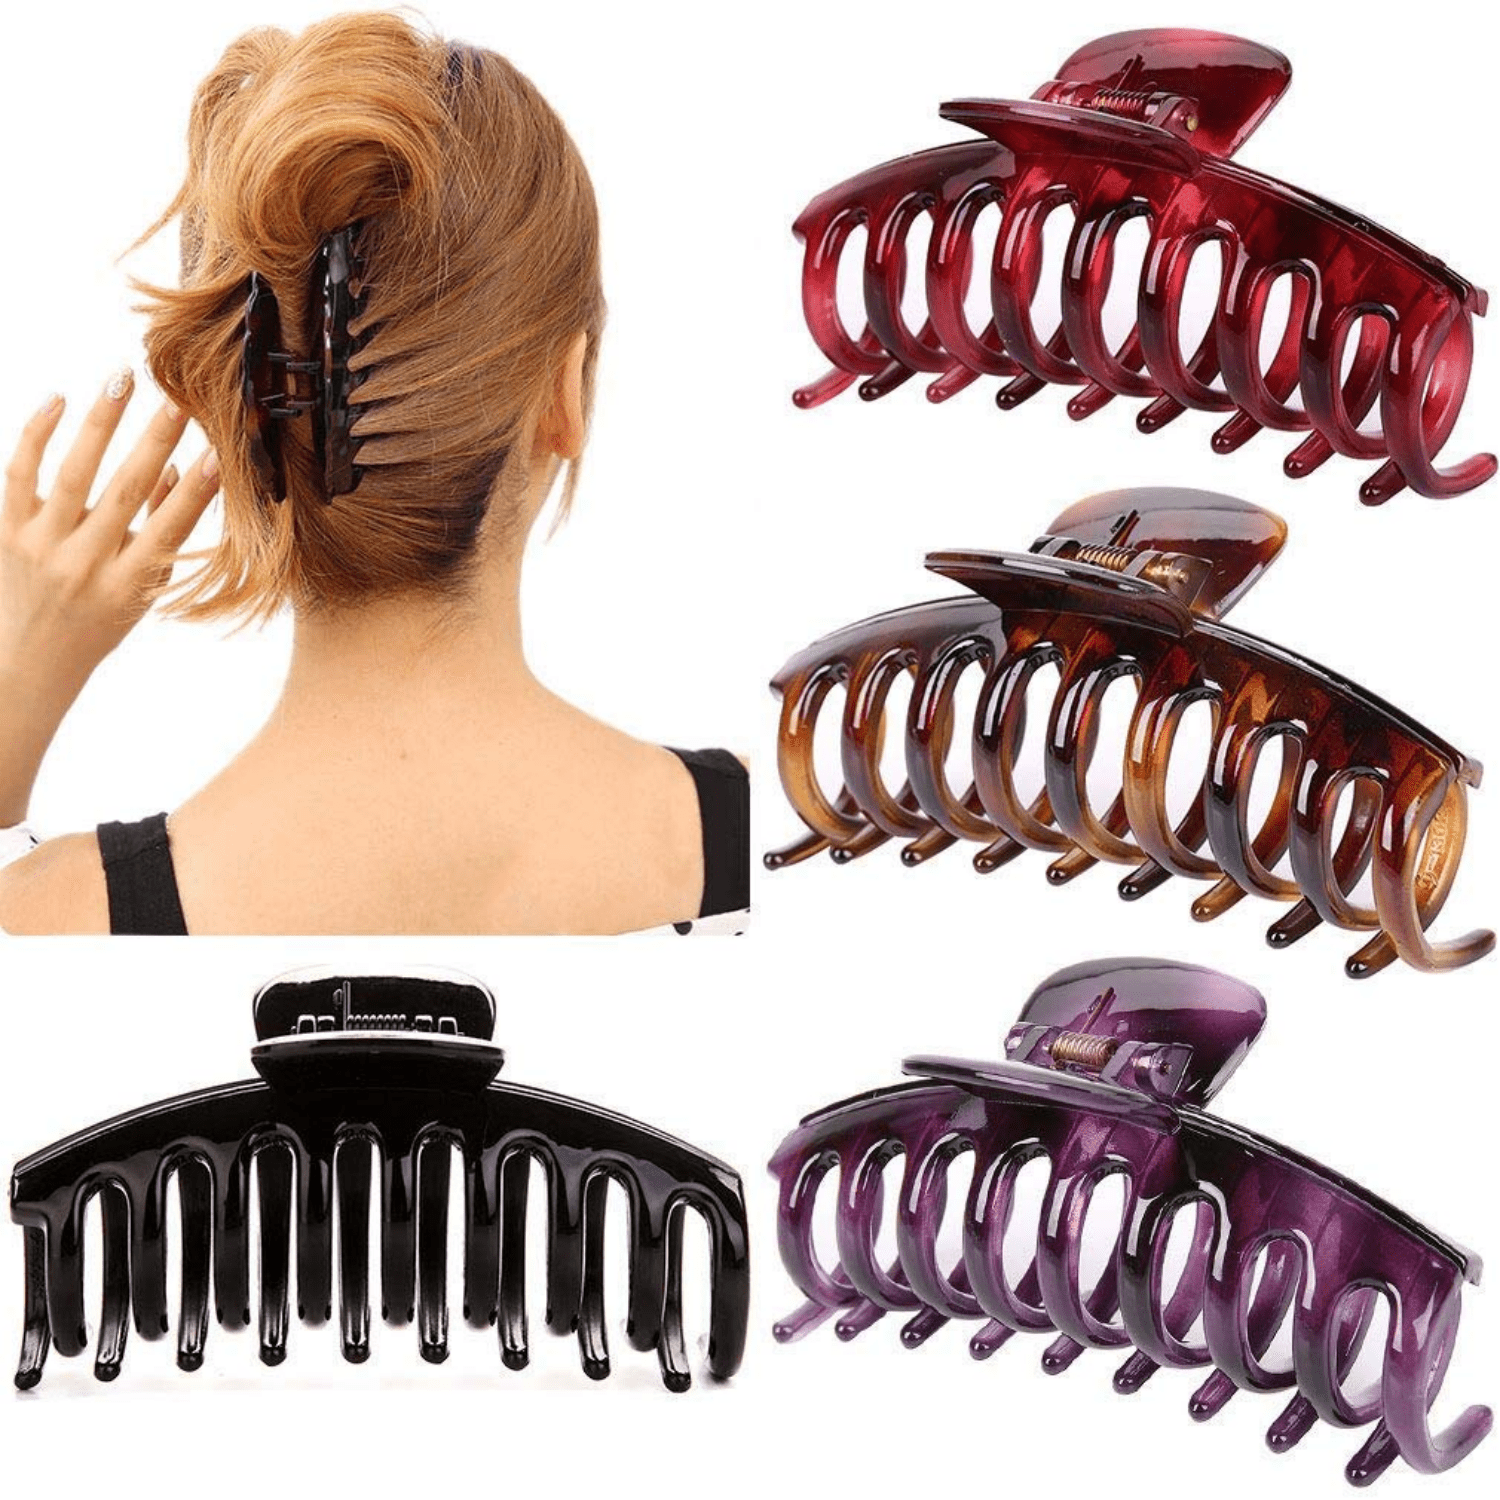 x2 Hair Jaw Claw Clip Clamp Women Barrette Large Butterfly Comb Pony Pin Set New 